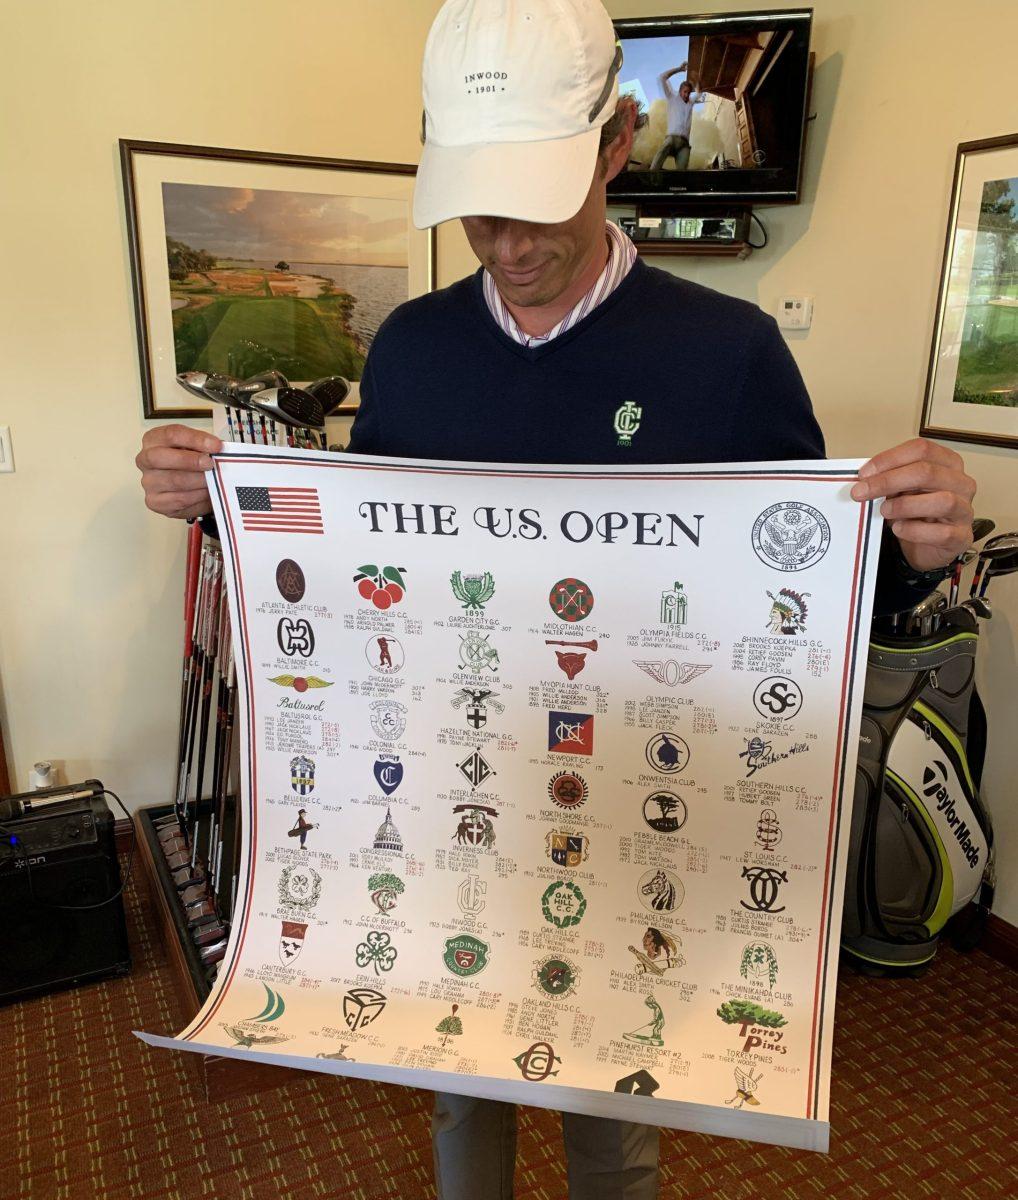 Kyle Higgins, the Head Golf Pro at Inwood Country Club, holds a model of one of the posters auctioned off. PHOTO COURTESY OF TOM COYNE